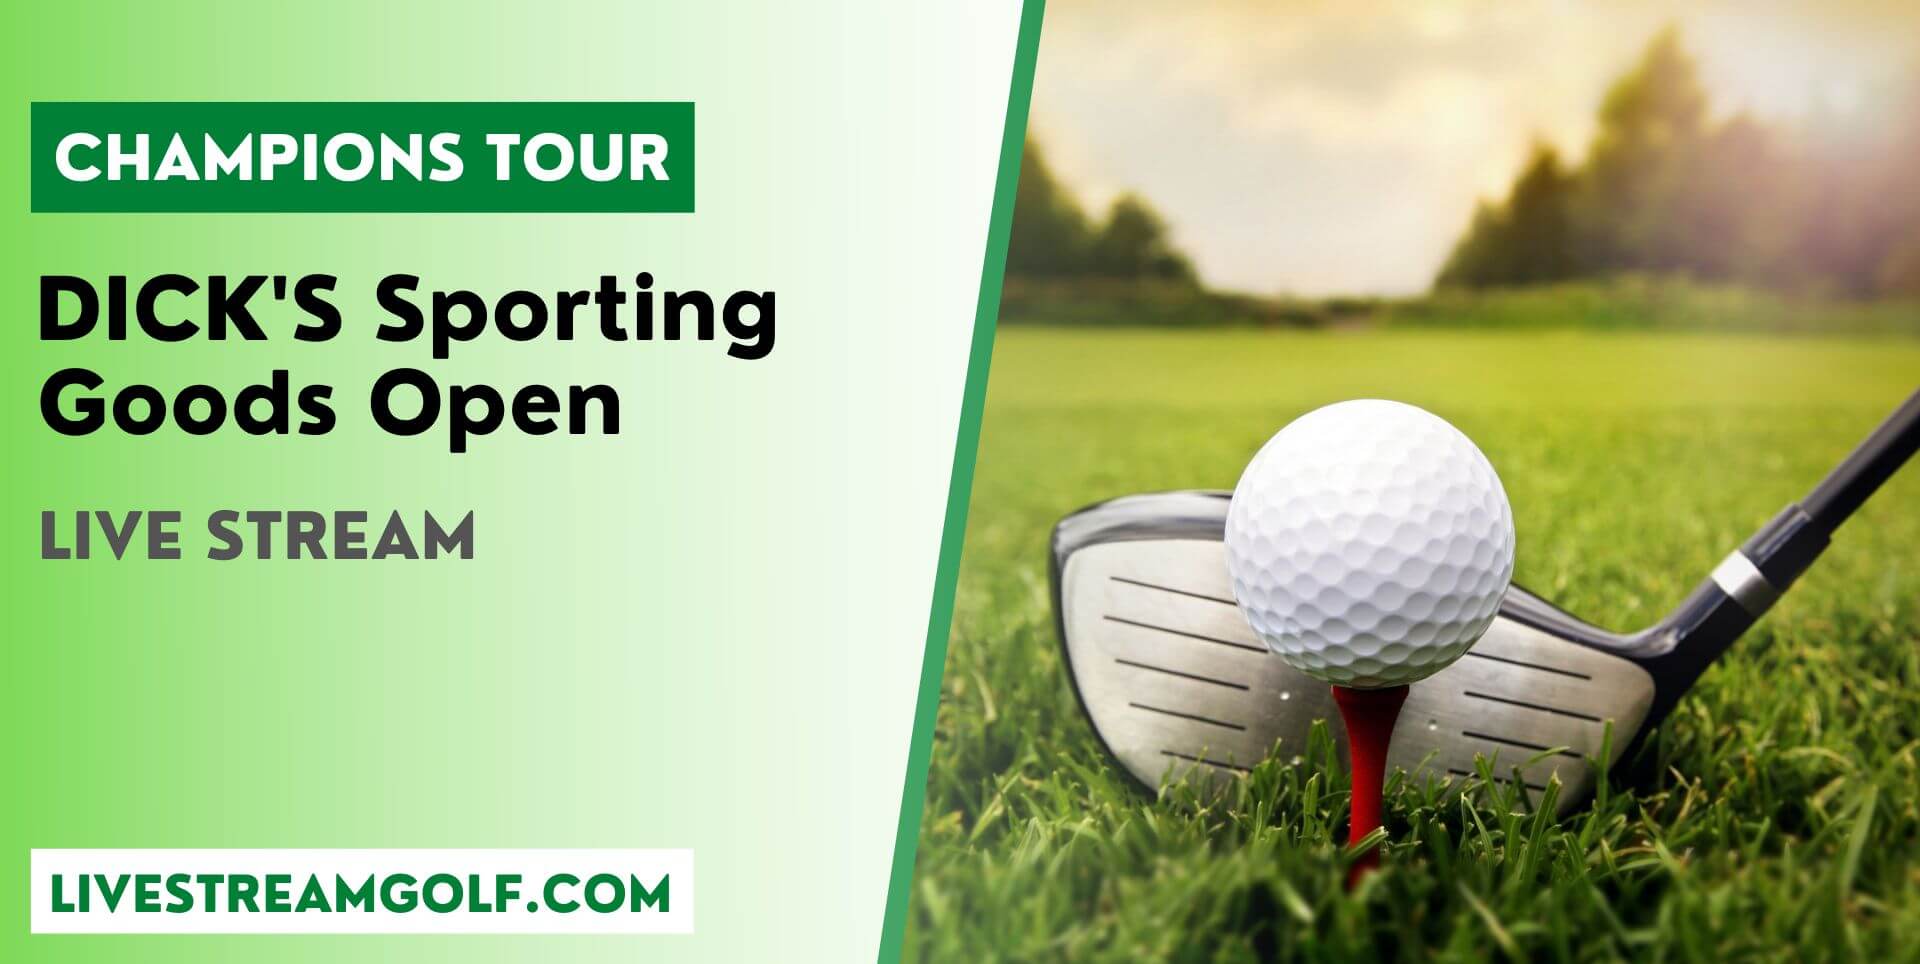 Dick Sporting Goods Open Day 2 Live Stream: Champions Tour 2022